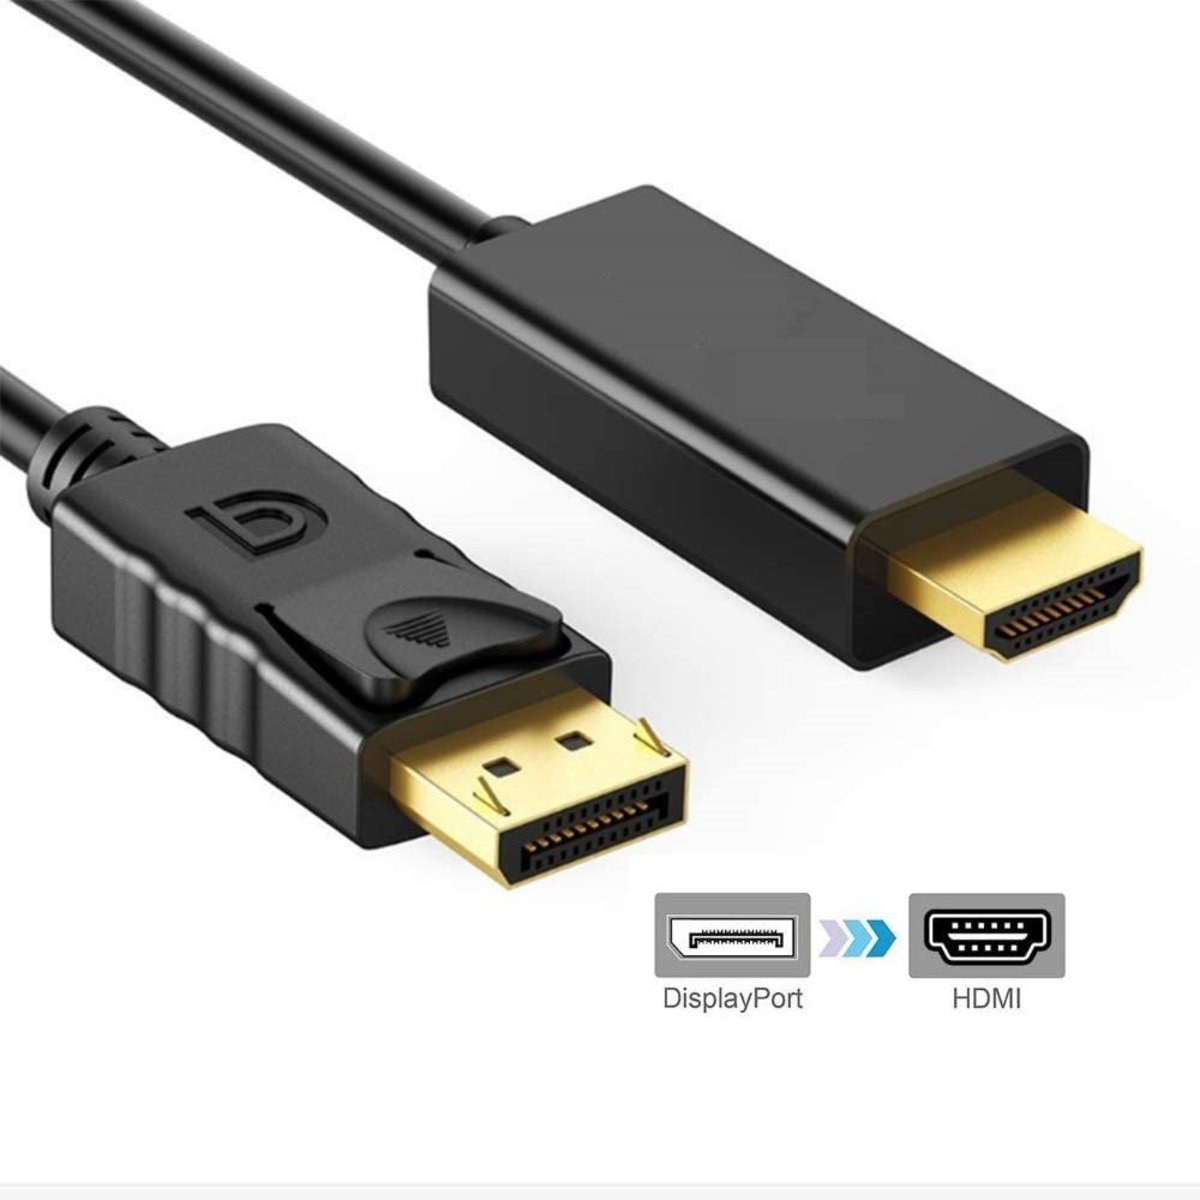 DisplayPort to HDMI, Benfei Gold-Plated DP Display Port to HDMI Adapter (Male to Female) Compatible